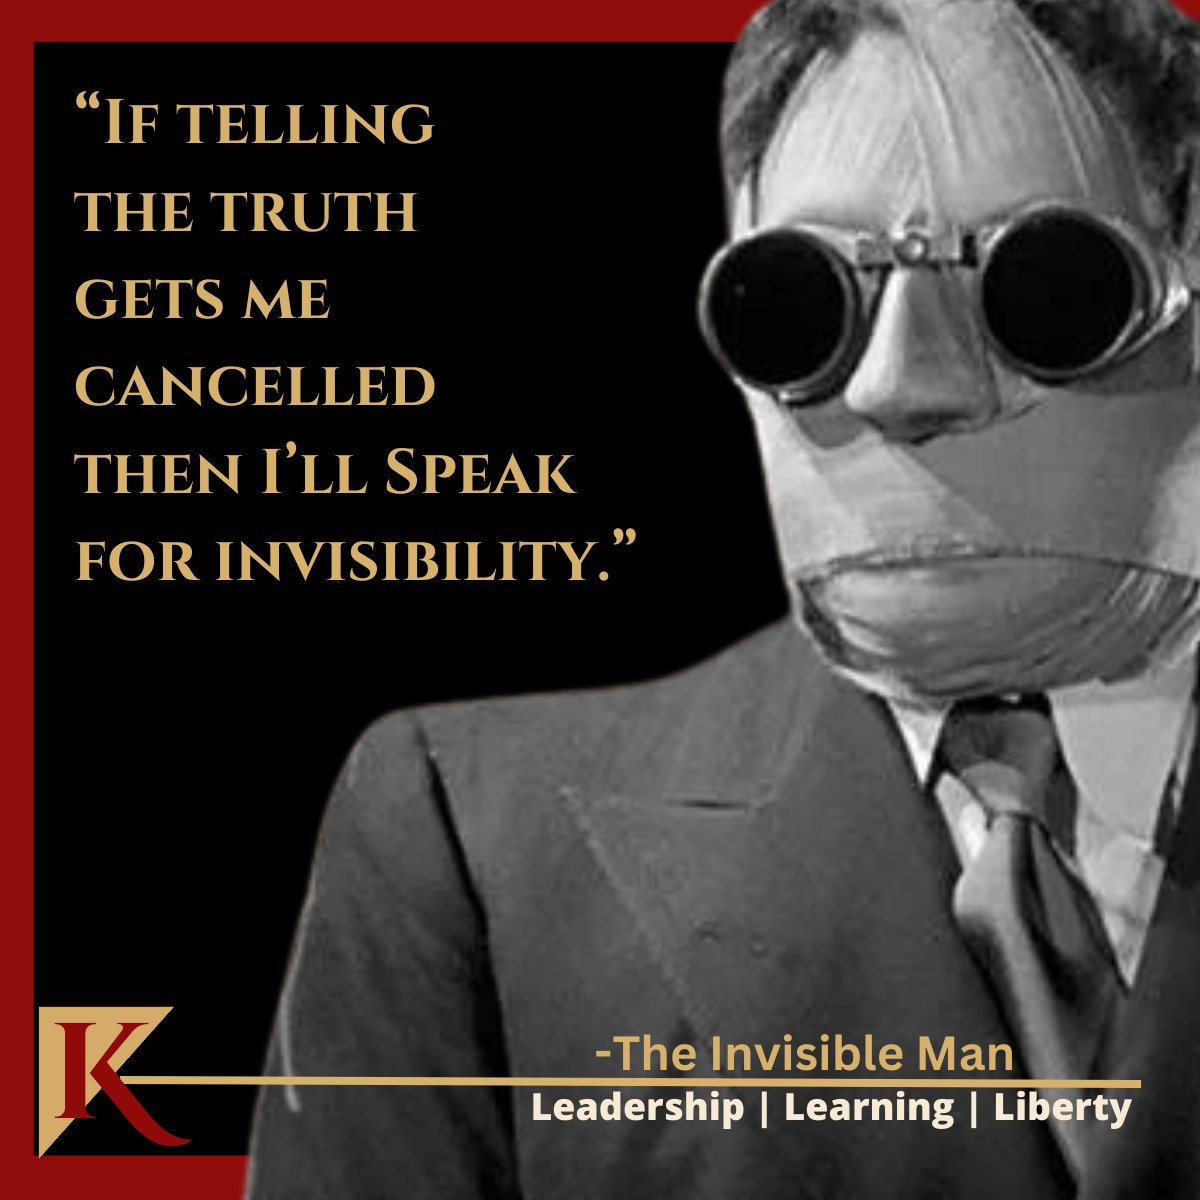 Hello Honest Friends,
If telling the Truth makes you invisible then keep telling it. The fear of cancellation is the foundation, the bedrock of integrity.
#leadership #learning #liberty #poetichuman #cancelculture #nofear #truth #integrity